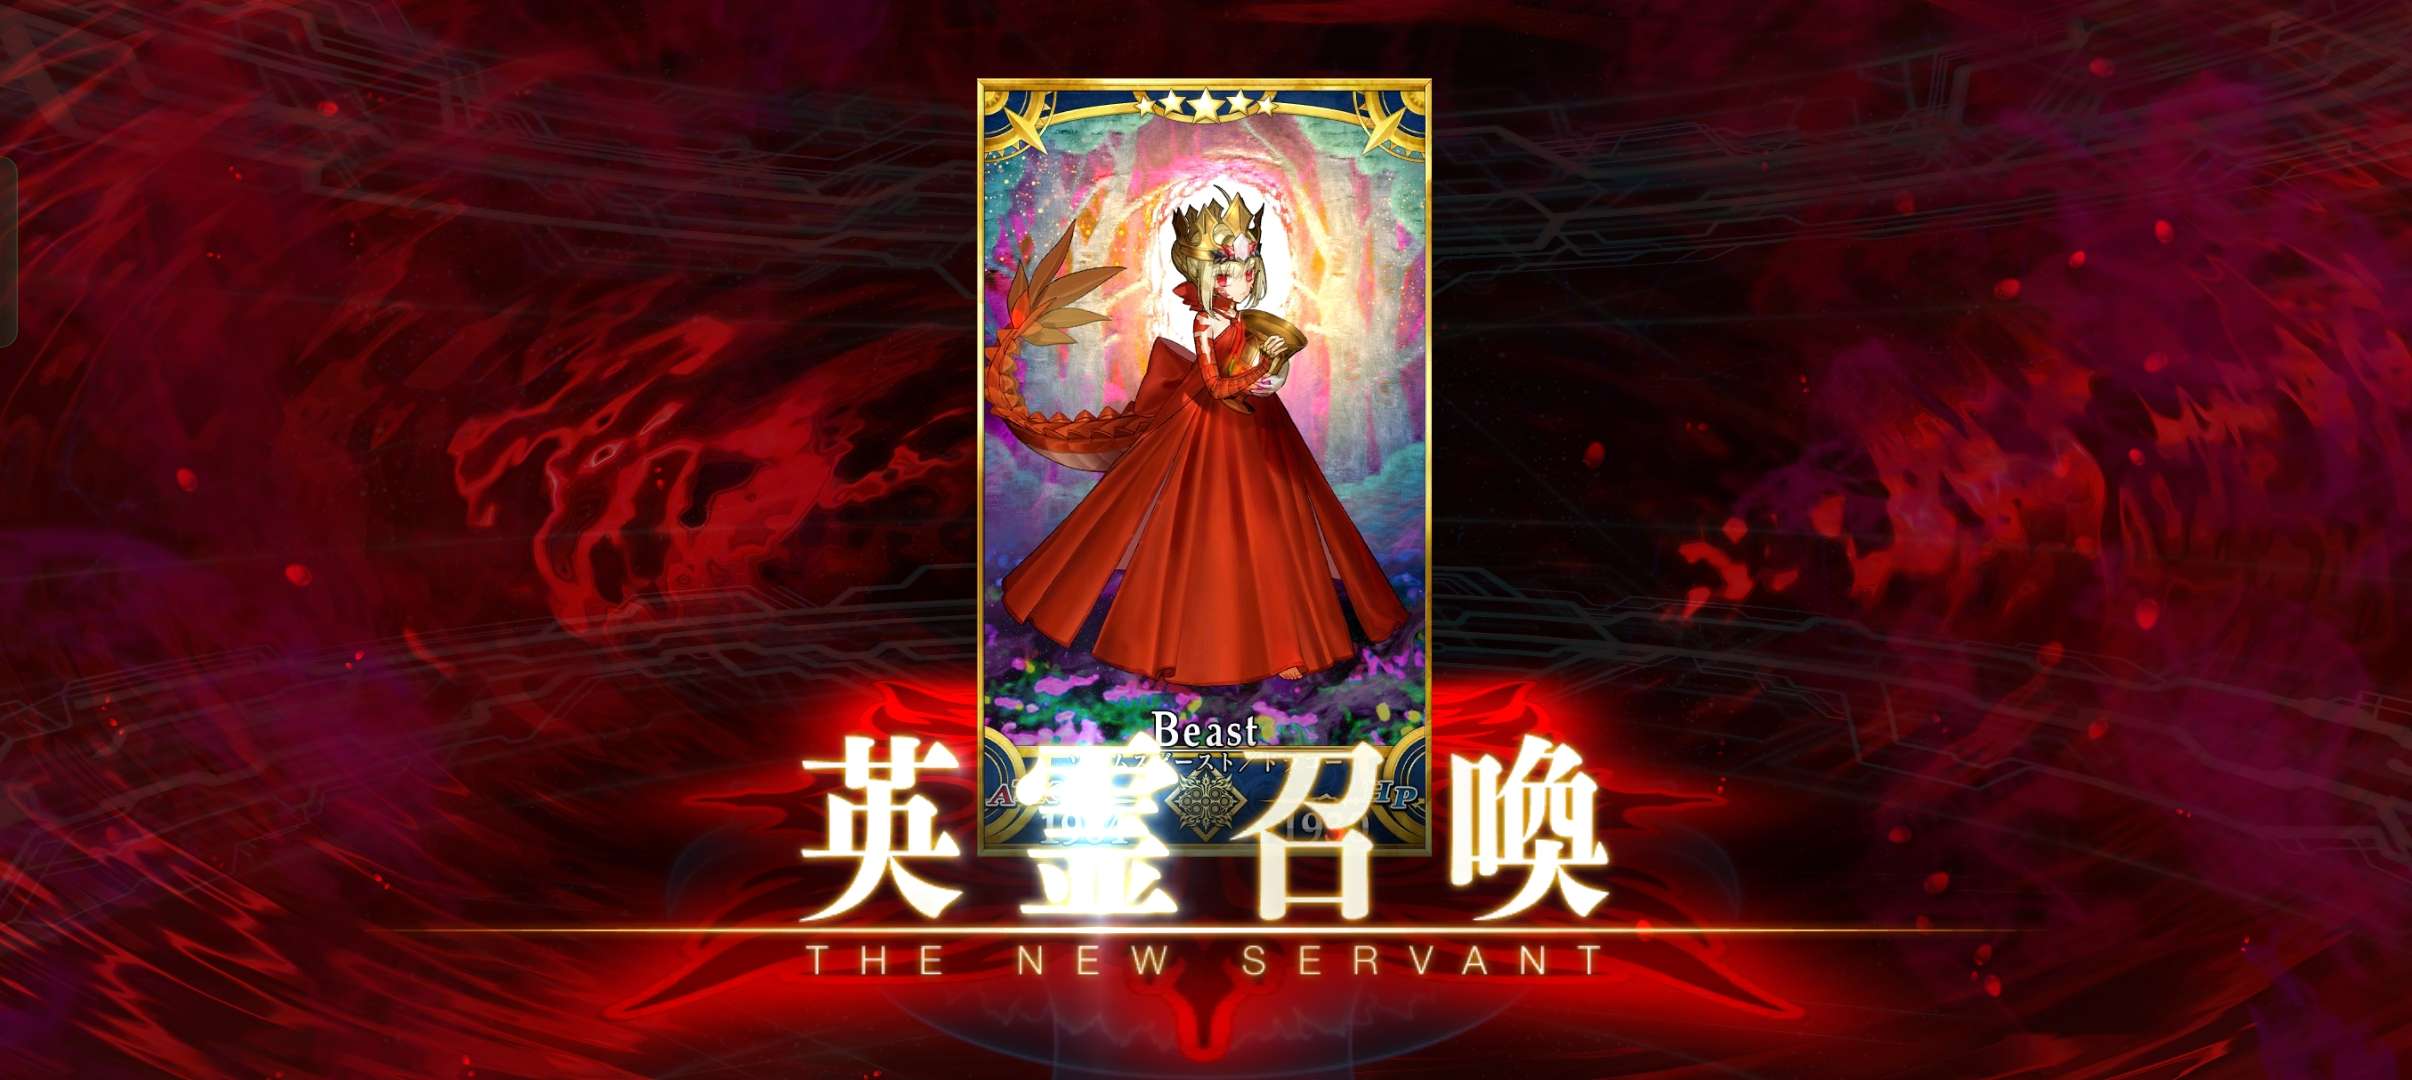 Fate/Grand Order JP Adds Larva/Tiamat, New Upgrade System, and Old Welfare  Servants - QooApp News